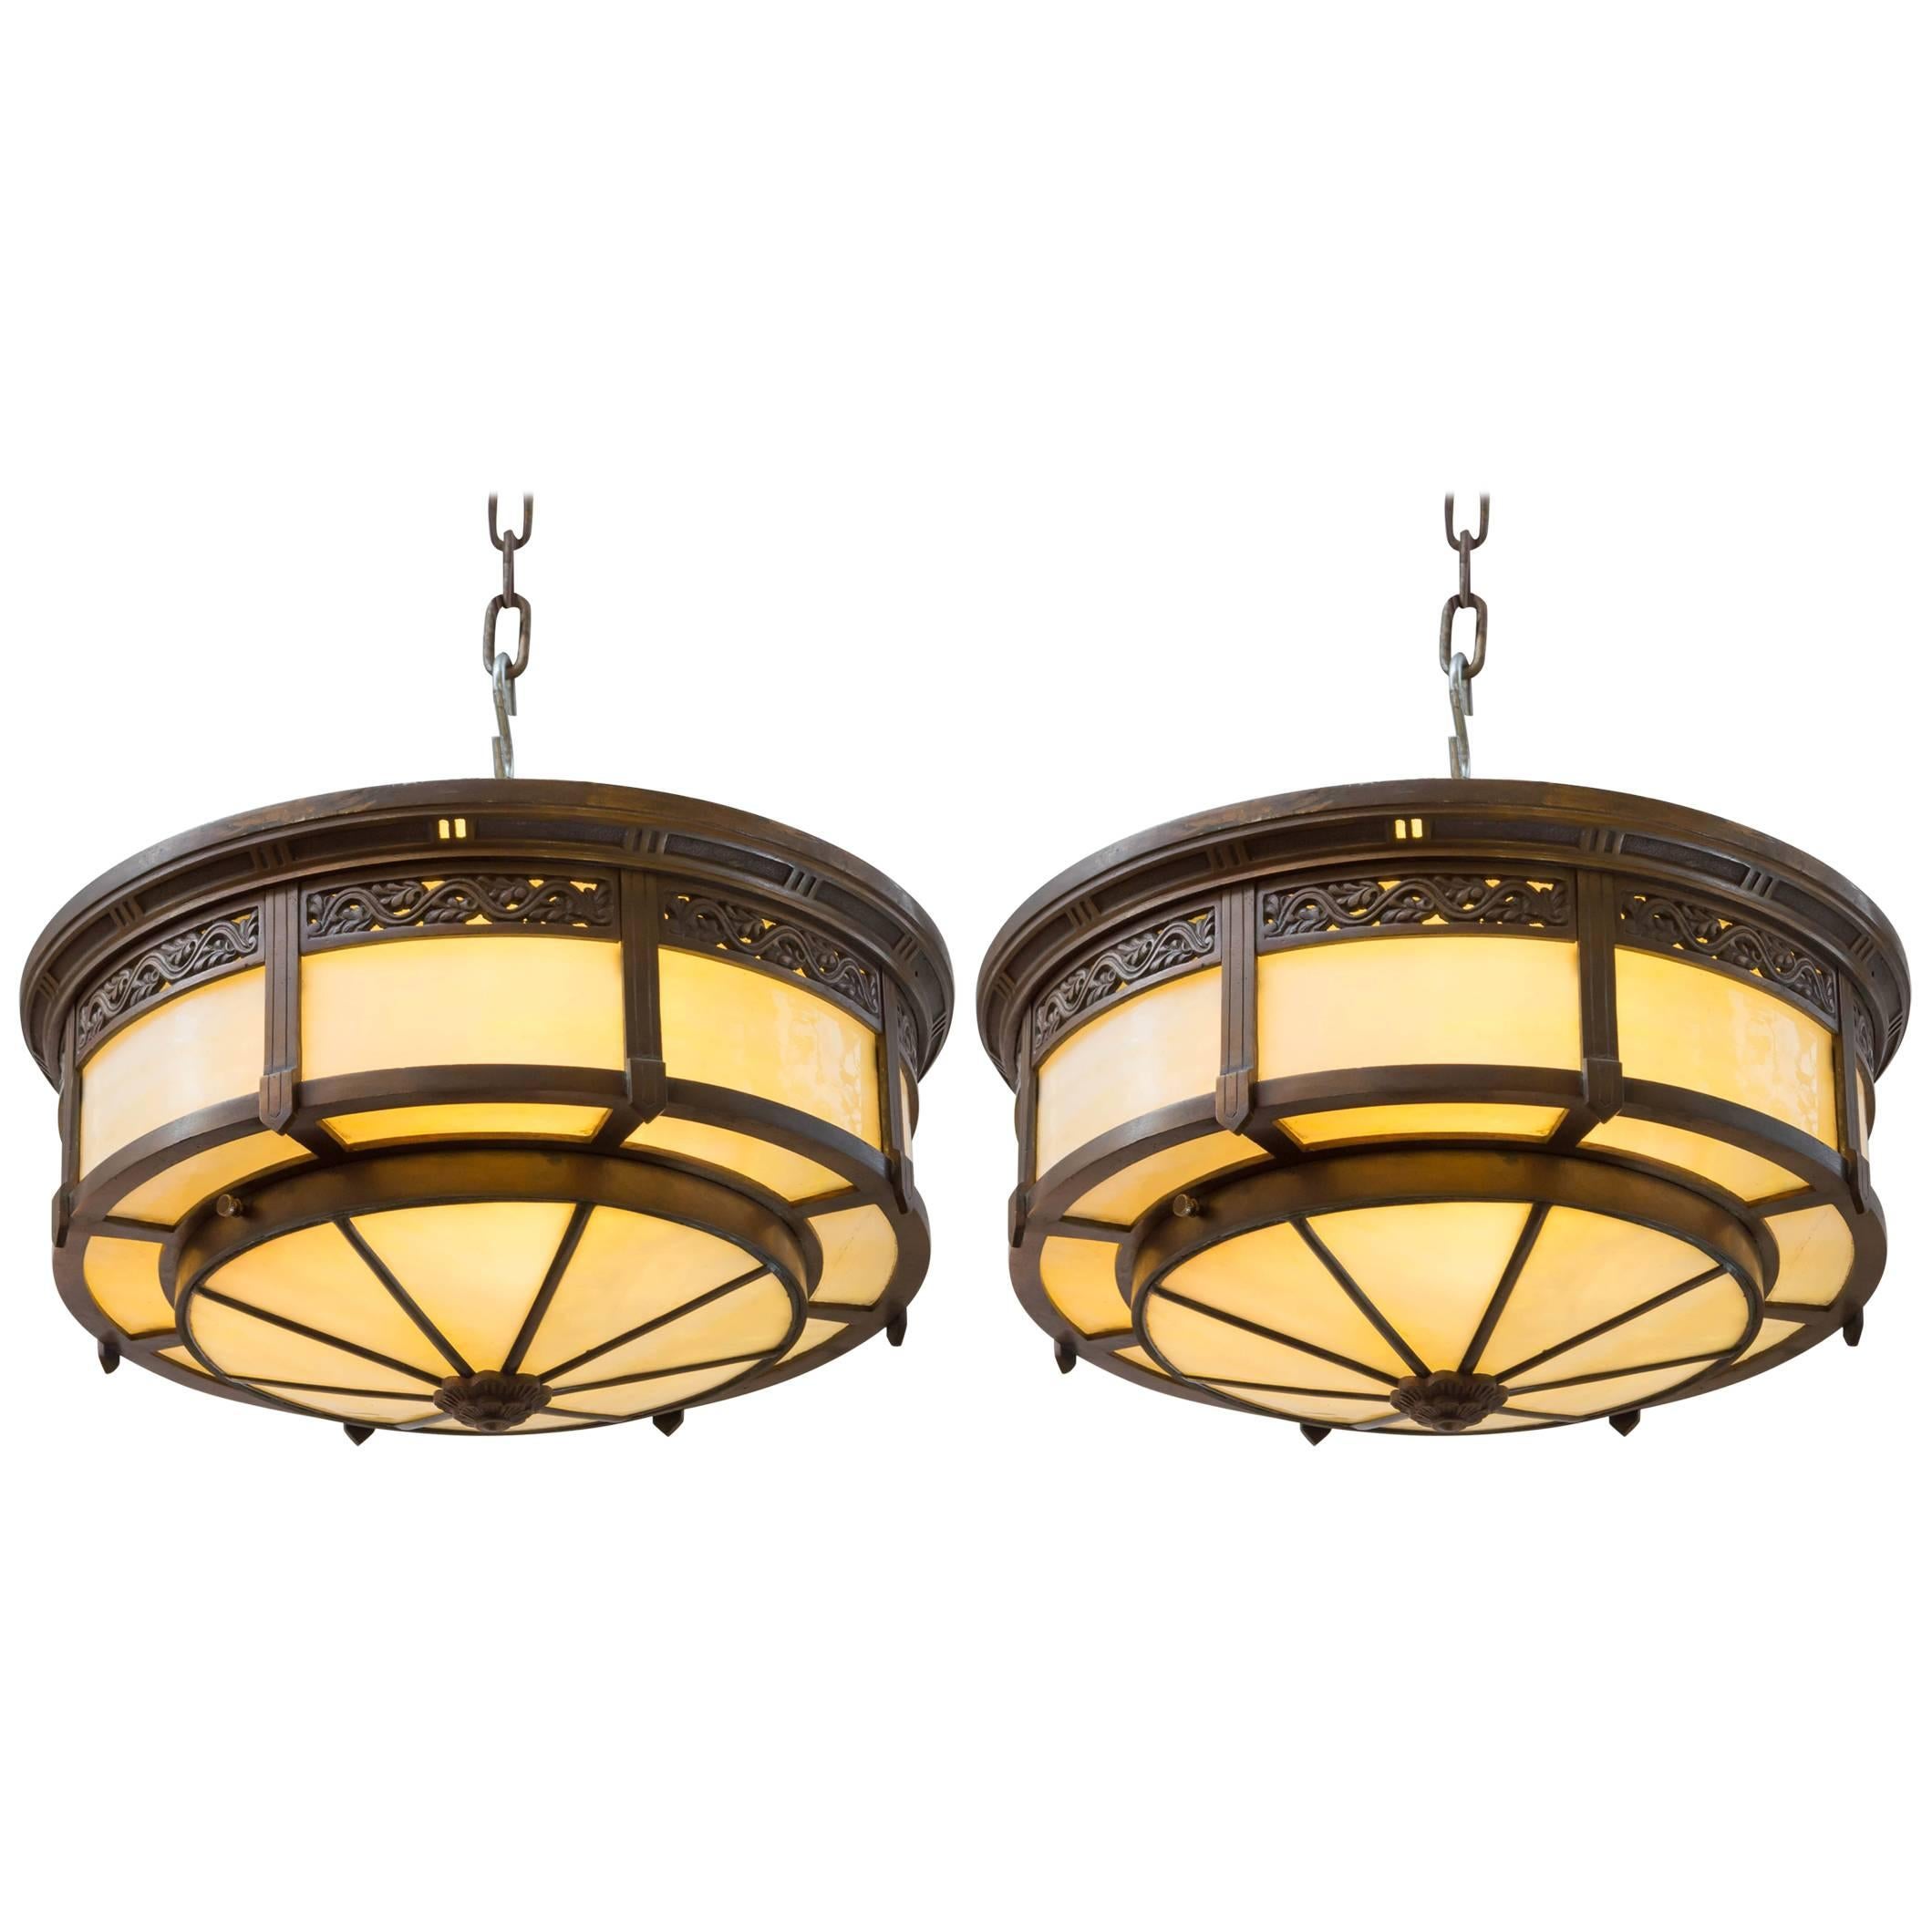 Pair of High Quality Bronze and Glass Flush Mount Chandeliers